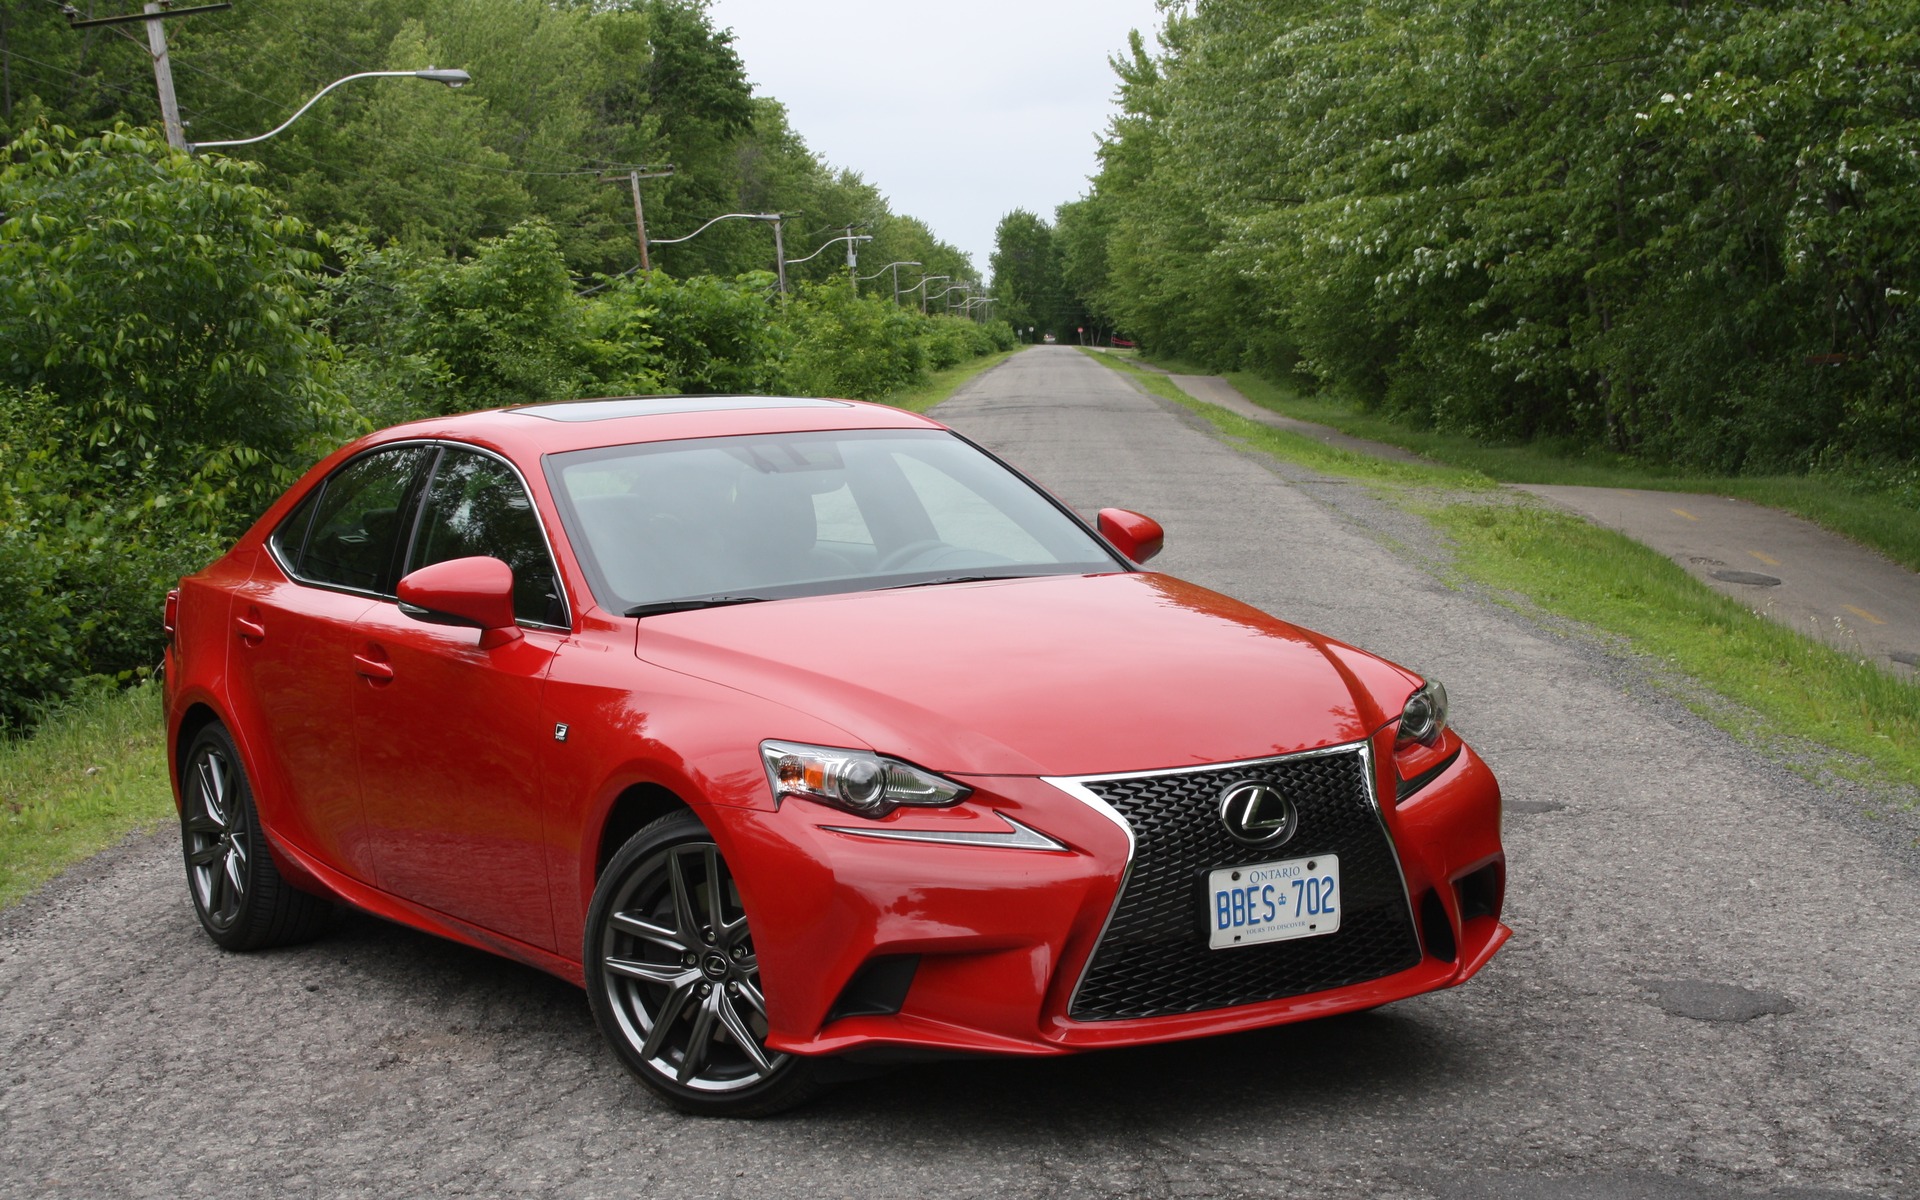 2016 Lexus IS 200t: Slowing Down - The Car Guide